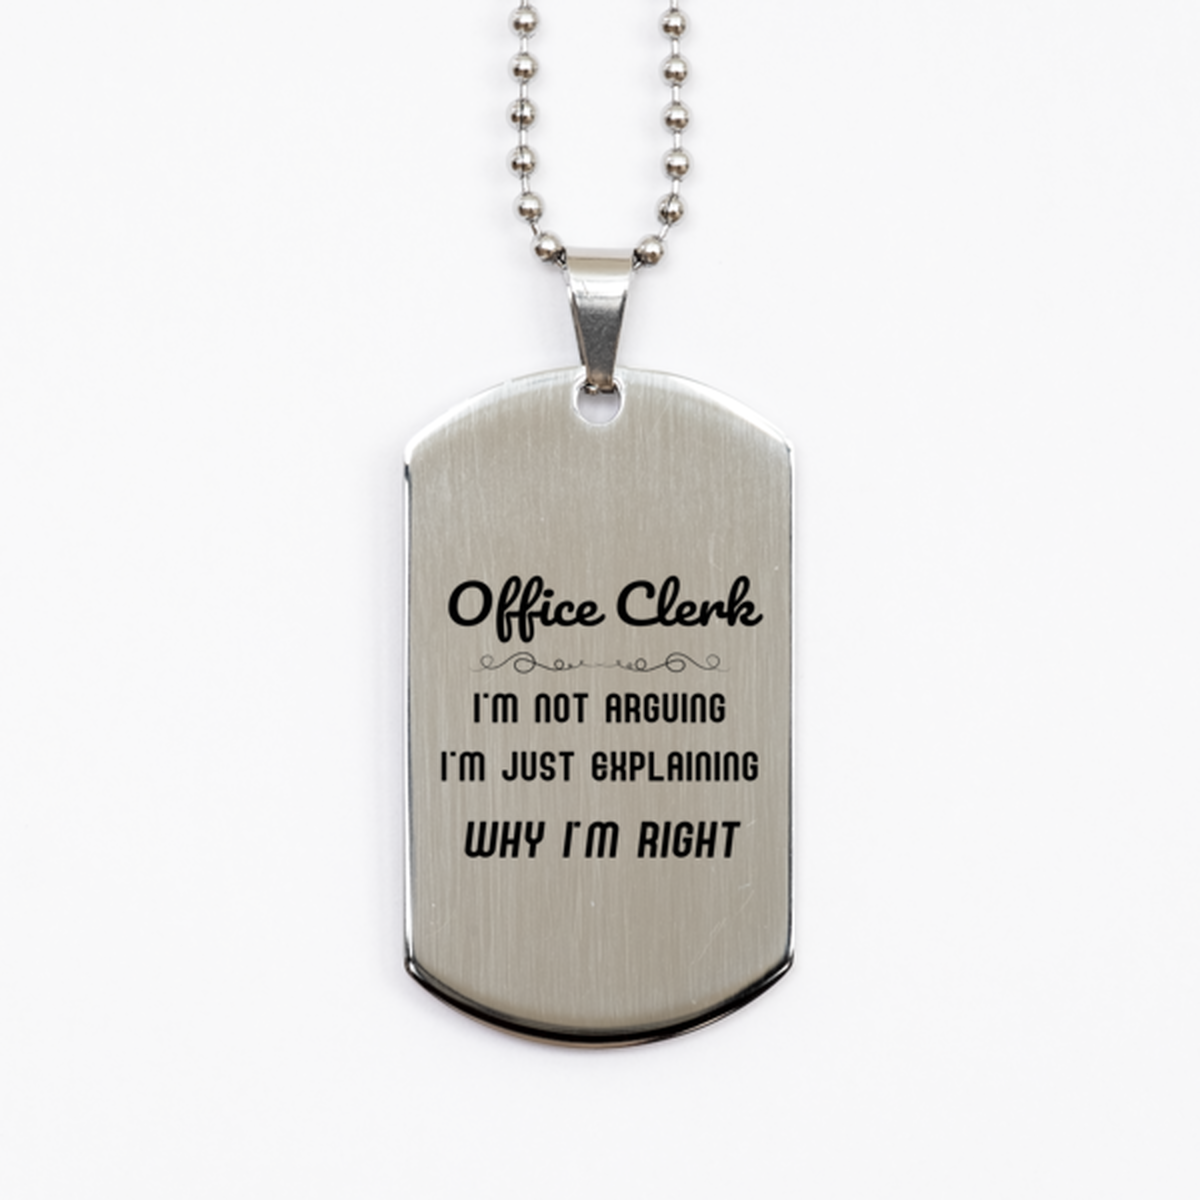 Office Clerk I'm not Arguing. I'm Just Explaining Why I'm RIGHT Silver Dog Tag, Funny Saying Quote Office Clerk Gifts For Office Clerk Graduation Birthday Christmas Gifts for Men Women Coworker